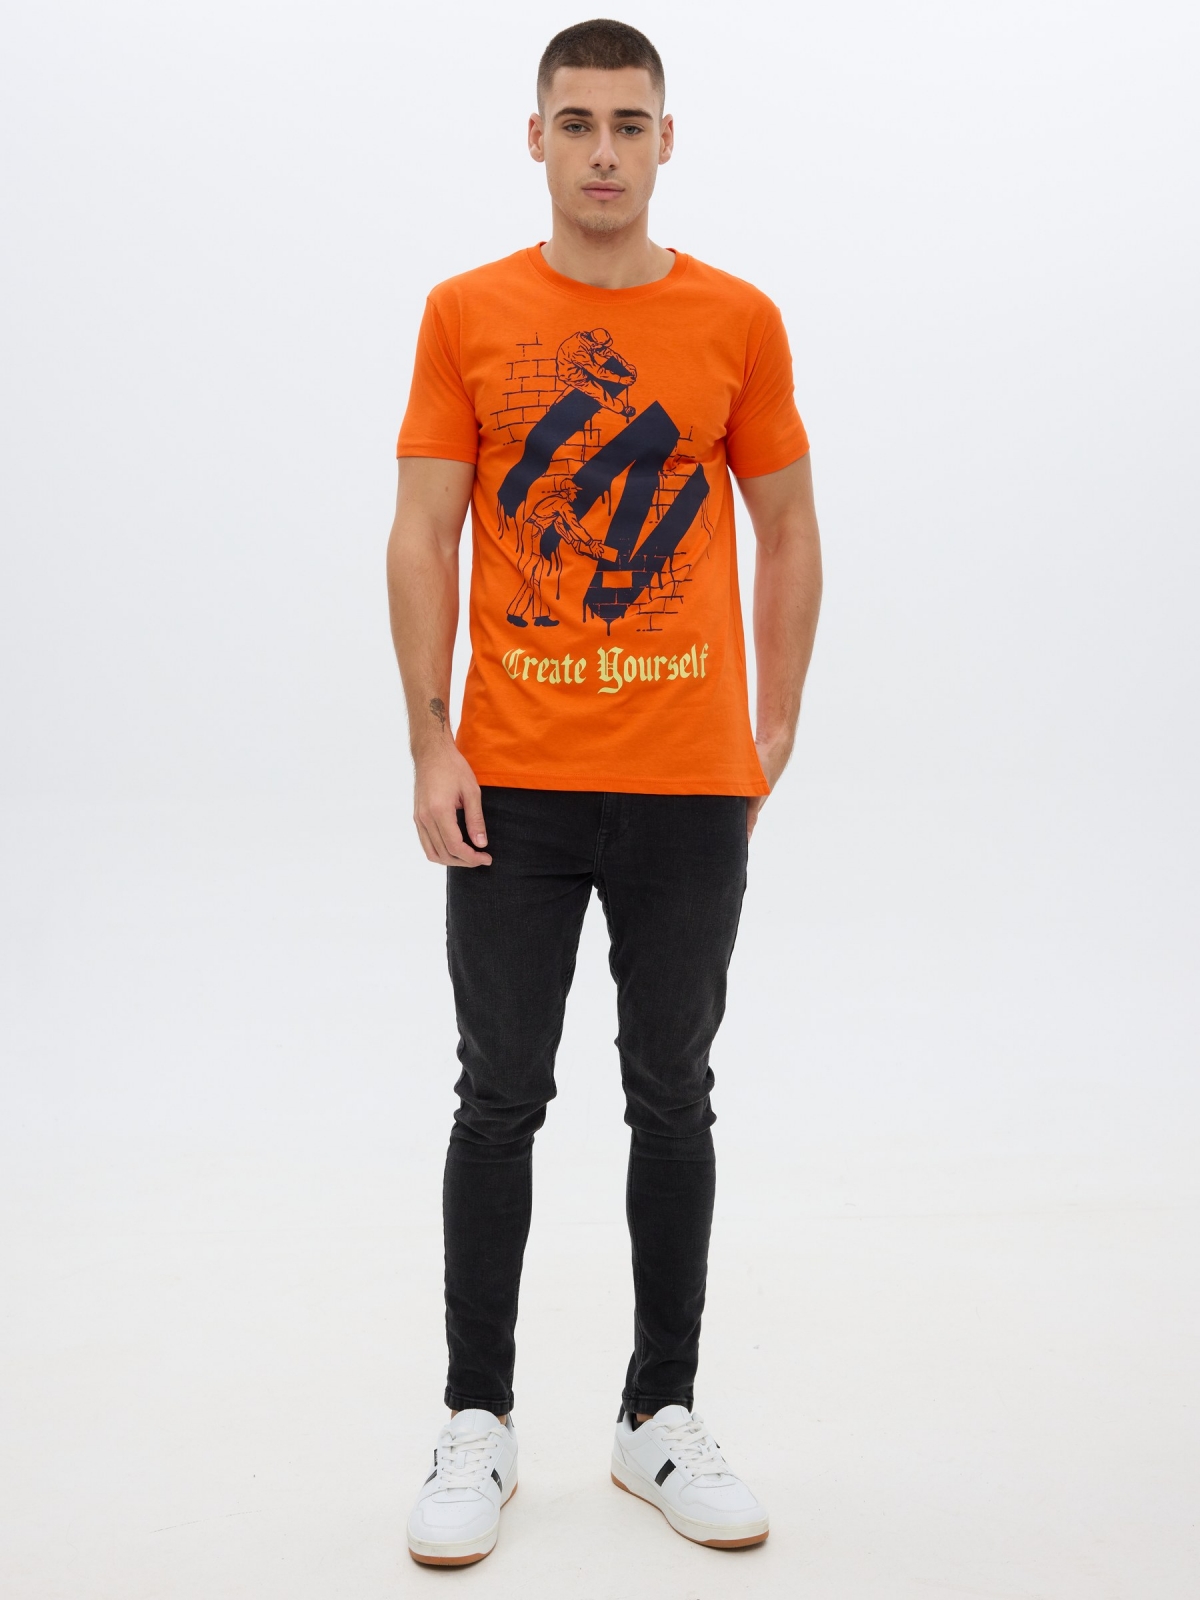 Create Yourself T-shirt orange front view